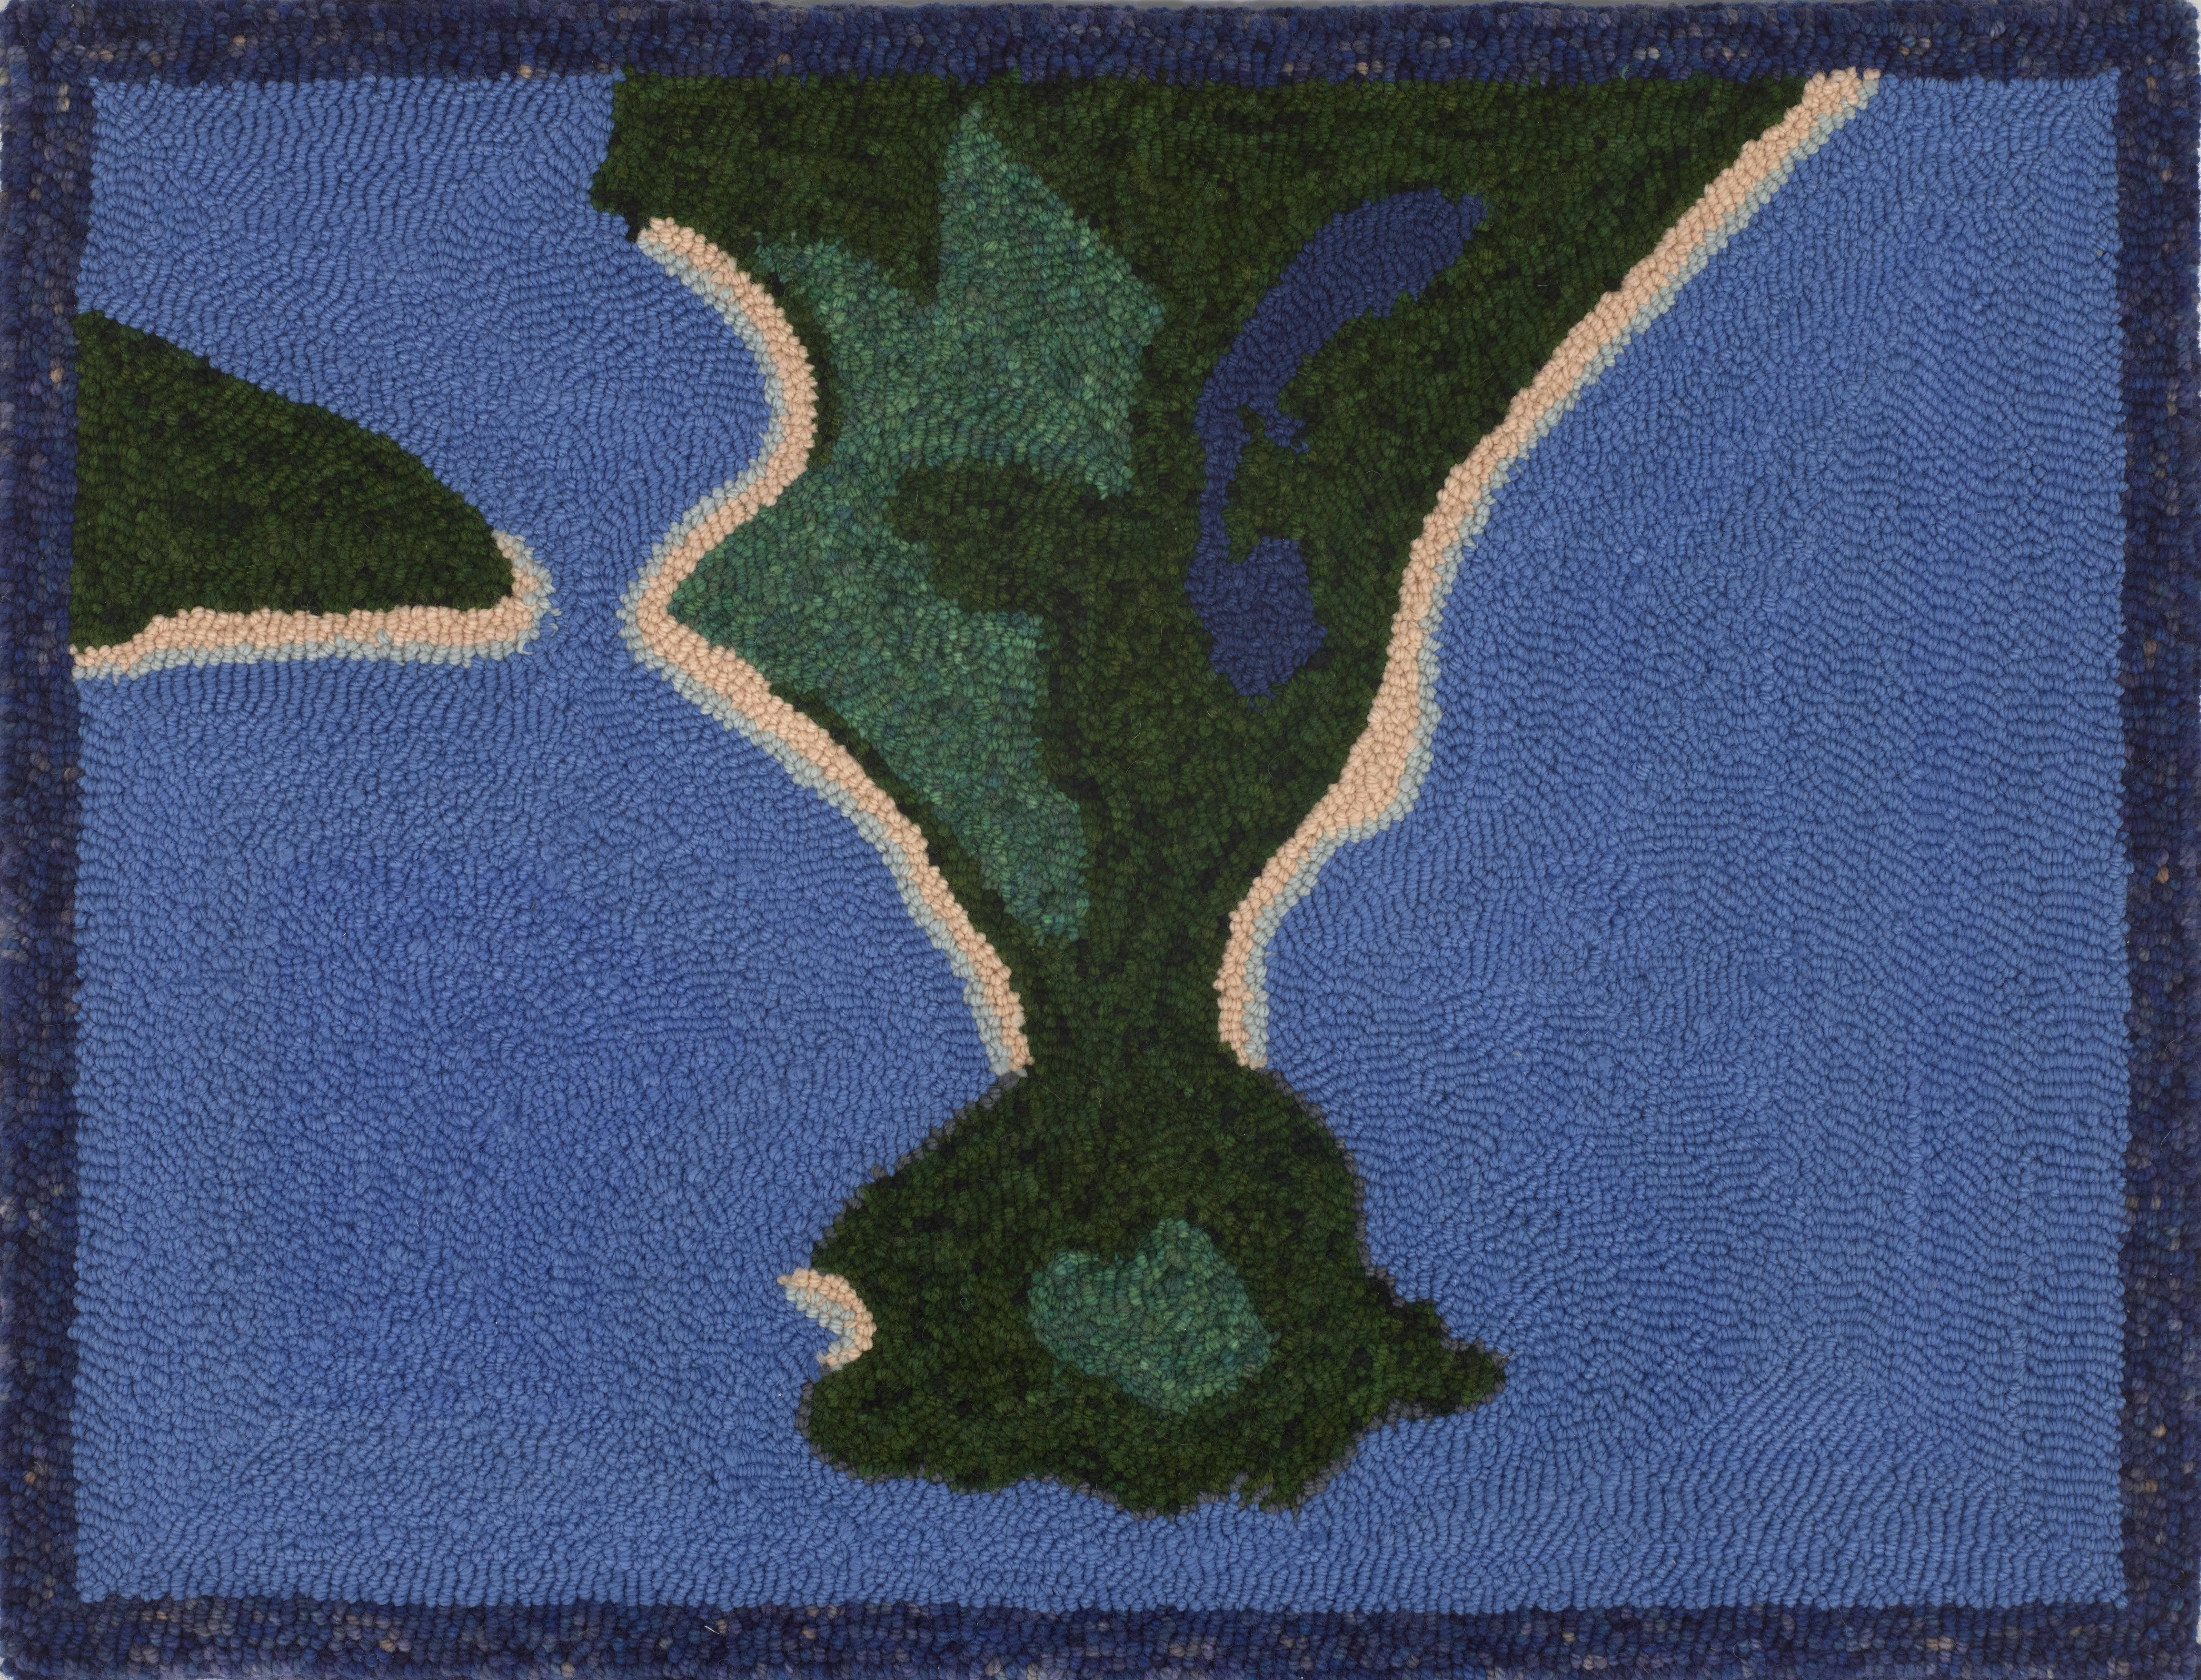 Prouts Neck, 2019, cotton and hand-dyed wool, 24 x 36 inches